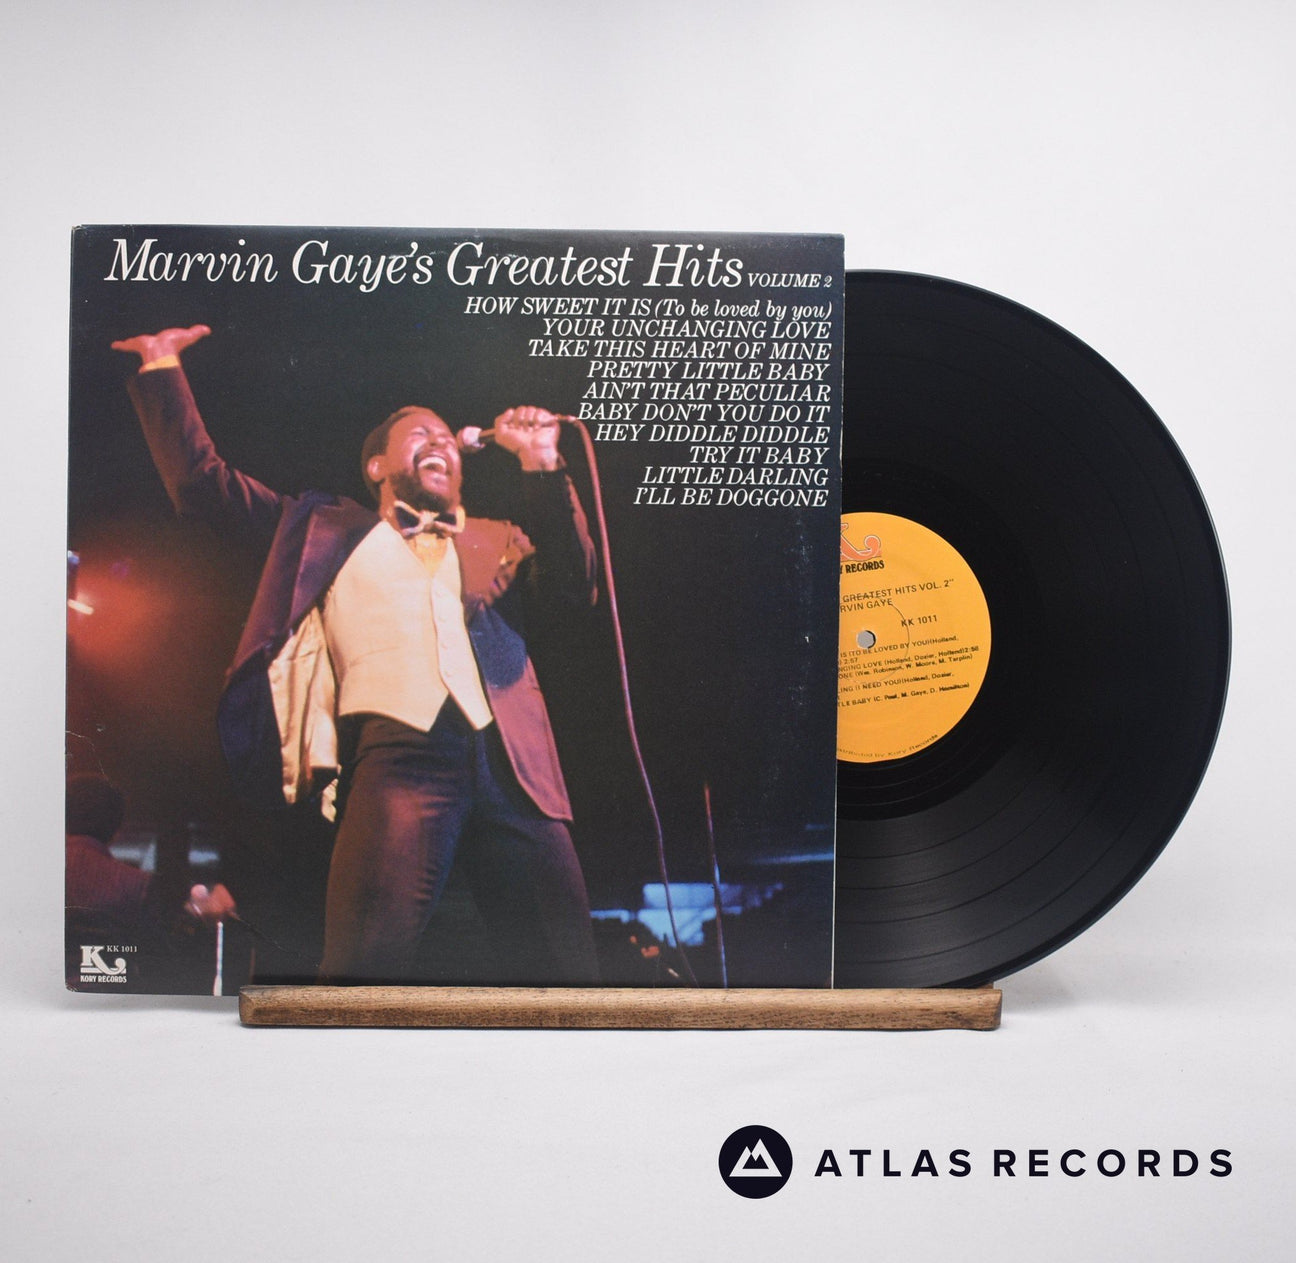 Marvin Gaye Marvin Gaye's Greatest Hits Volume 2 LP Vinyl Record - Front Cover & Record